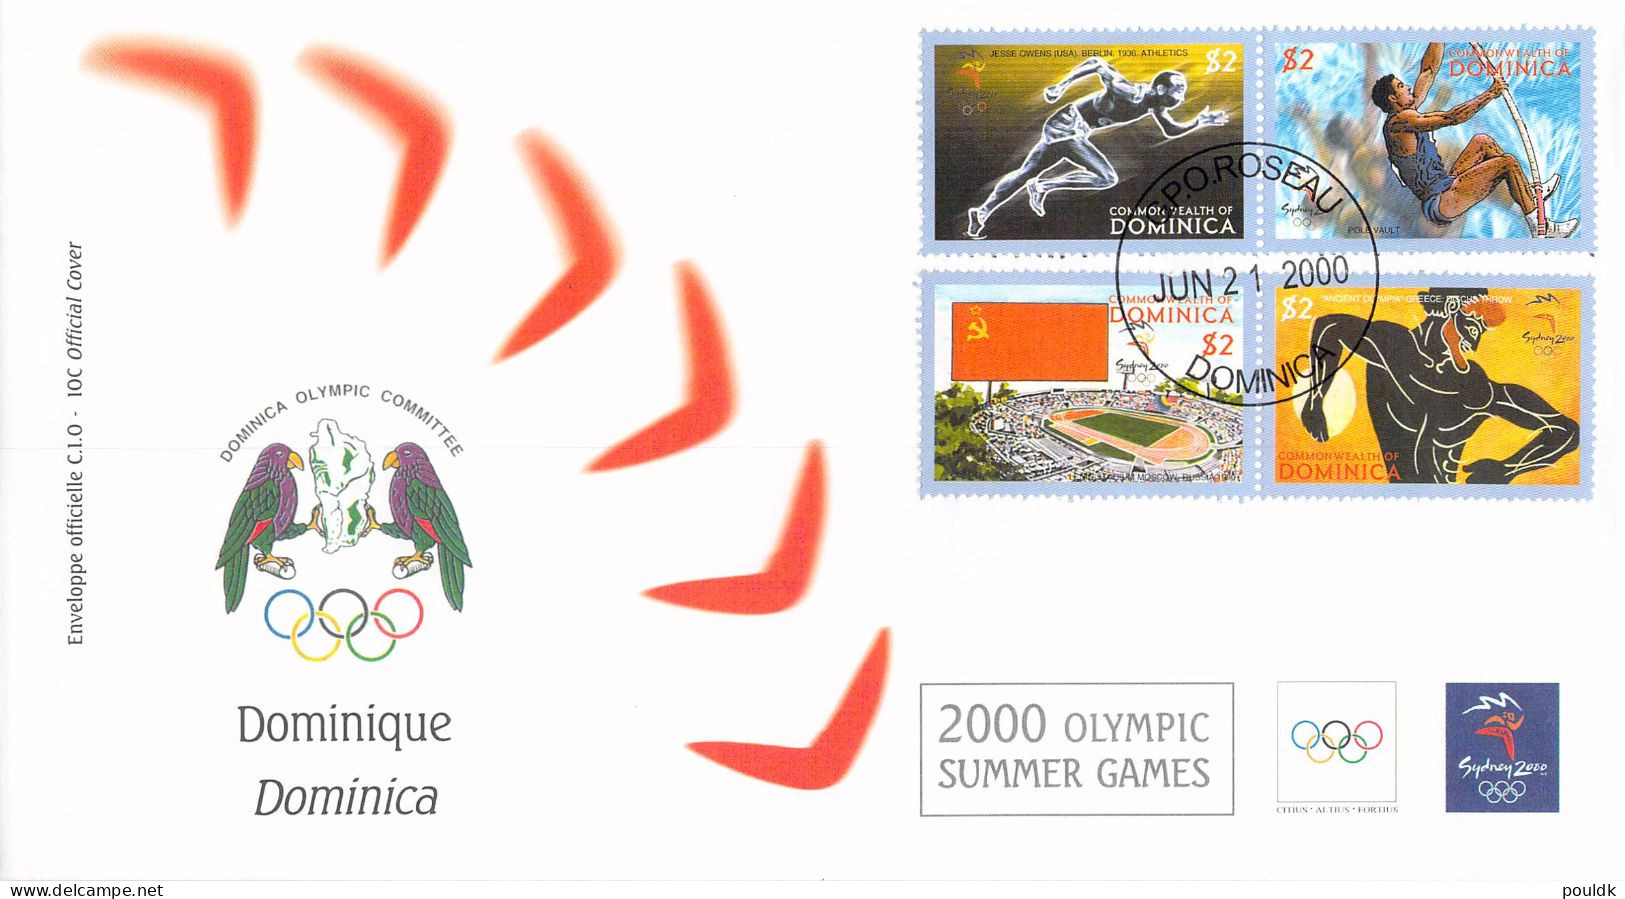 Olympic Games in Sydney 2000 - ten FDC. Postal weight approx 0,09 kg. Please read Sales Conditions under Image of Lot (0